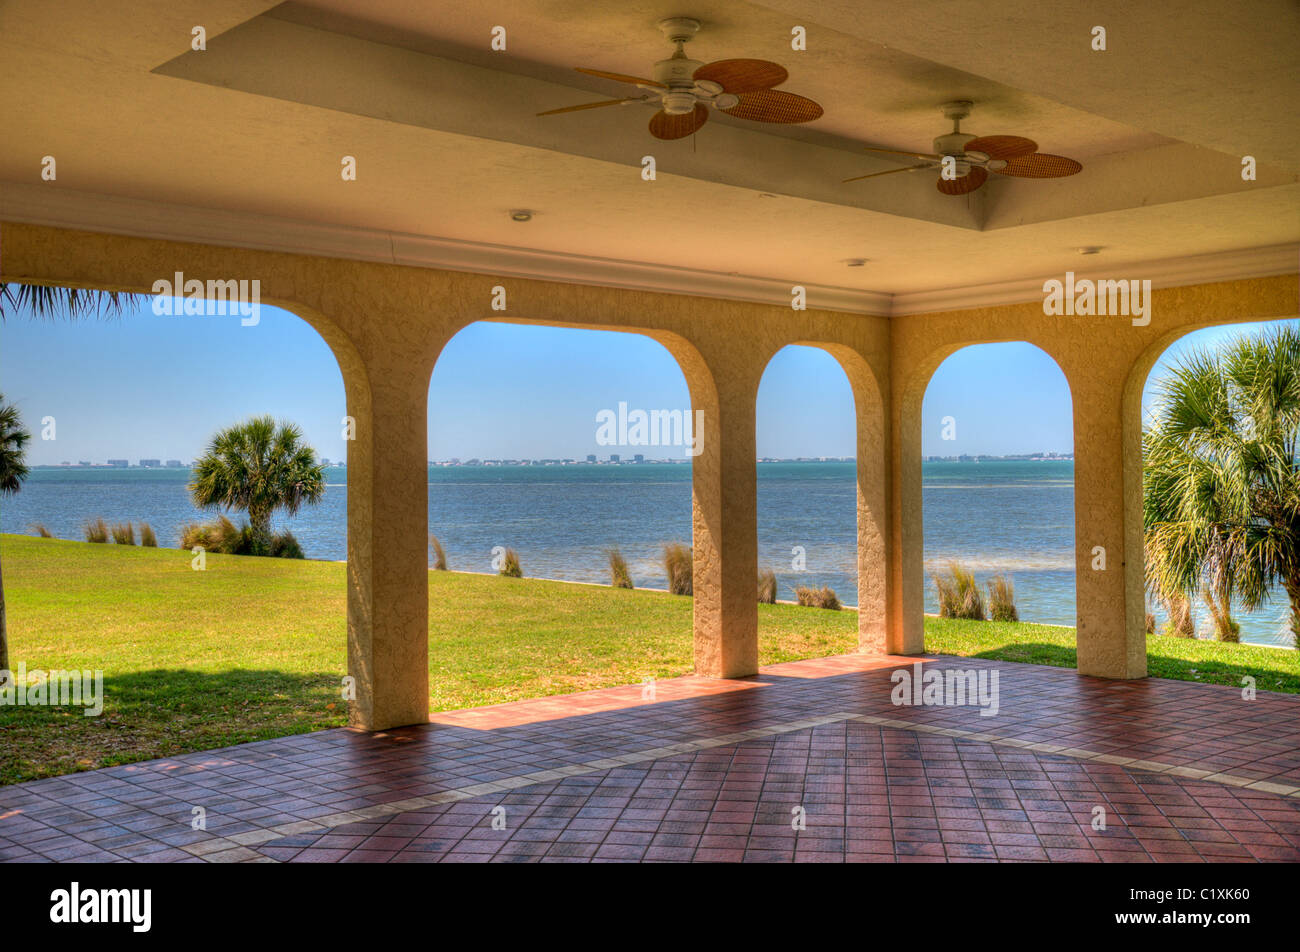 View of Sarasota Bay from the garden gazebo on the west lawn of the Powel Crosley Mansion. Stock Photo